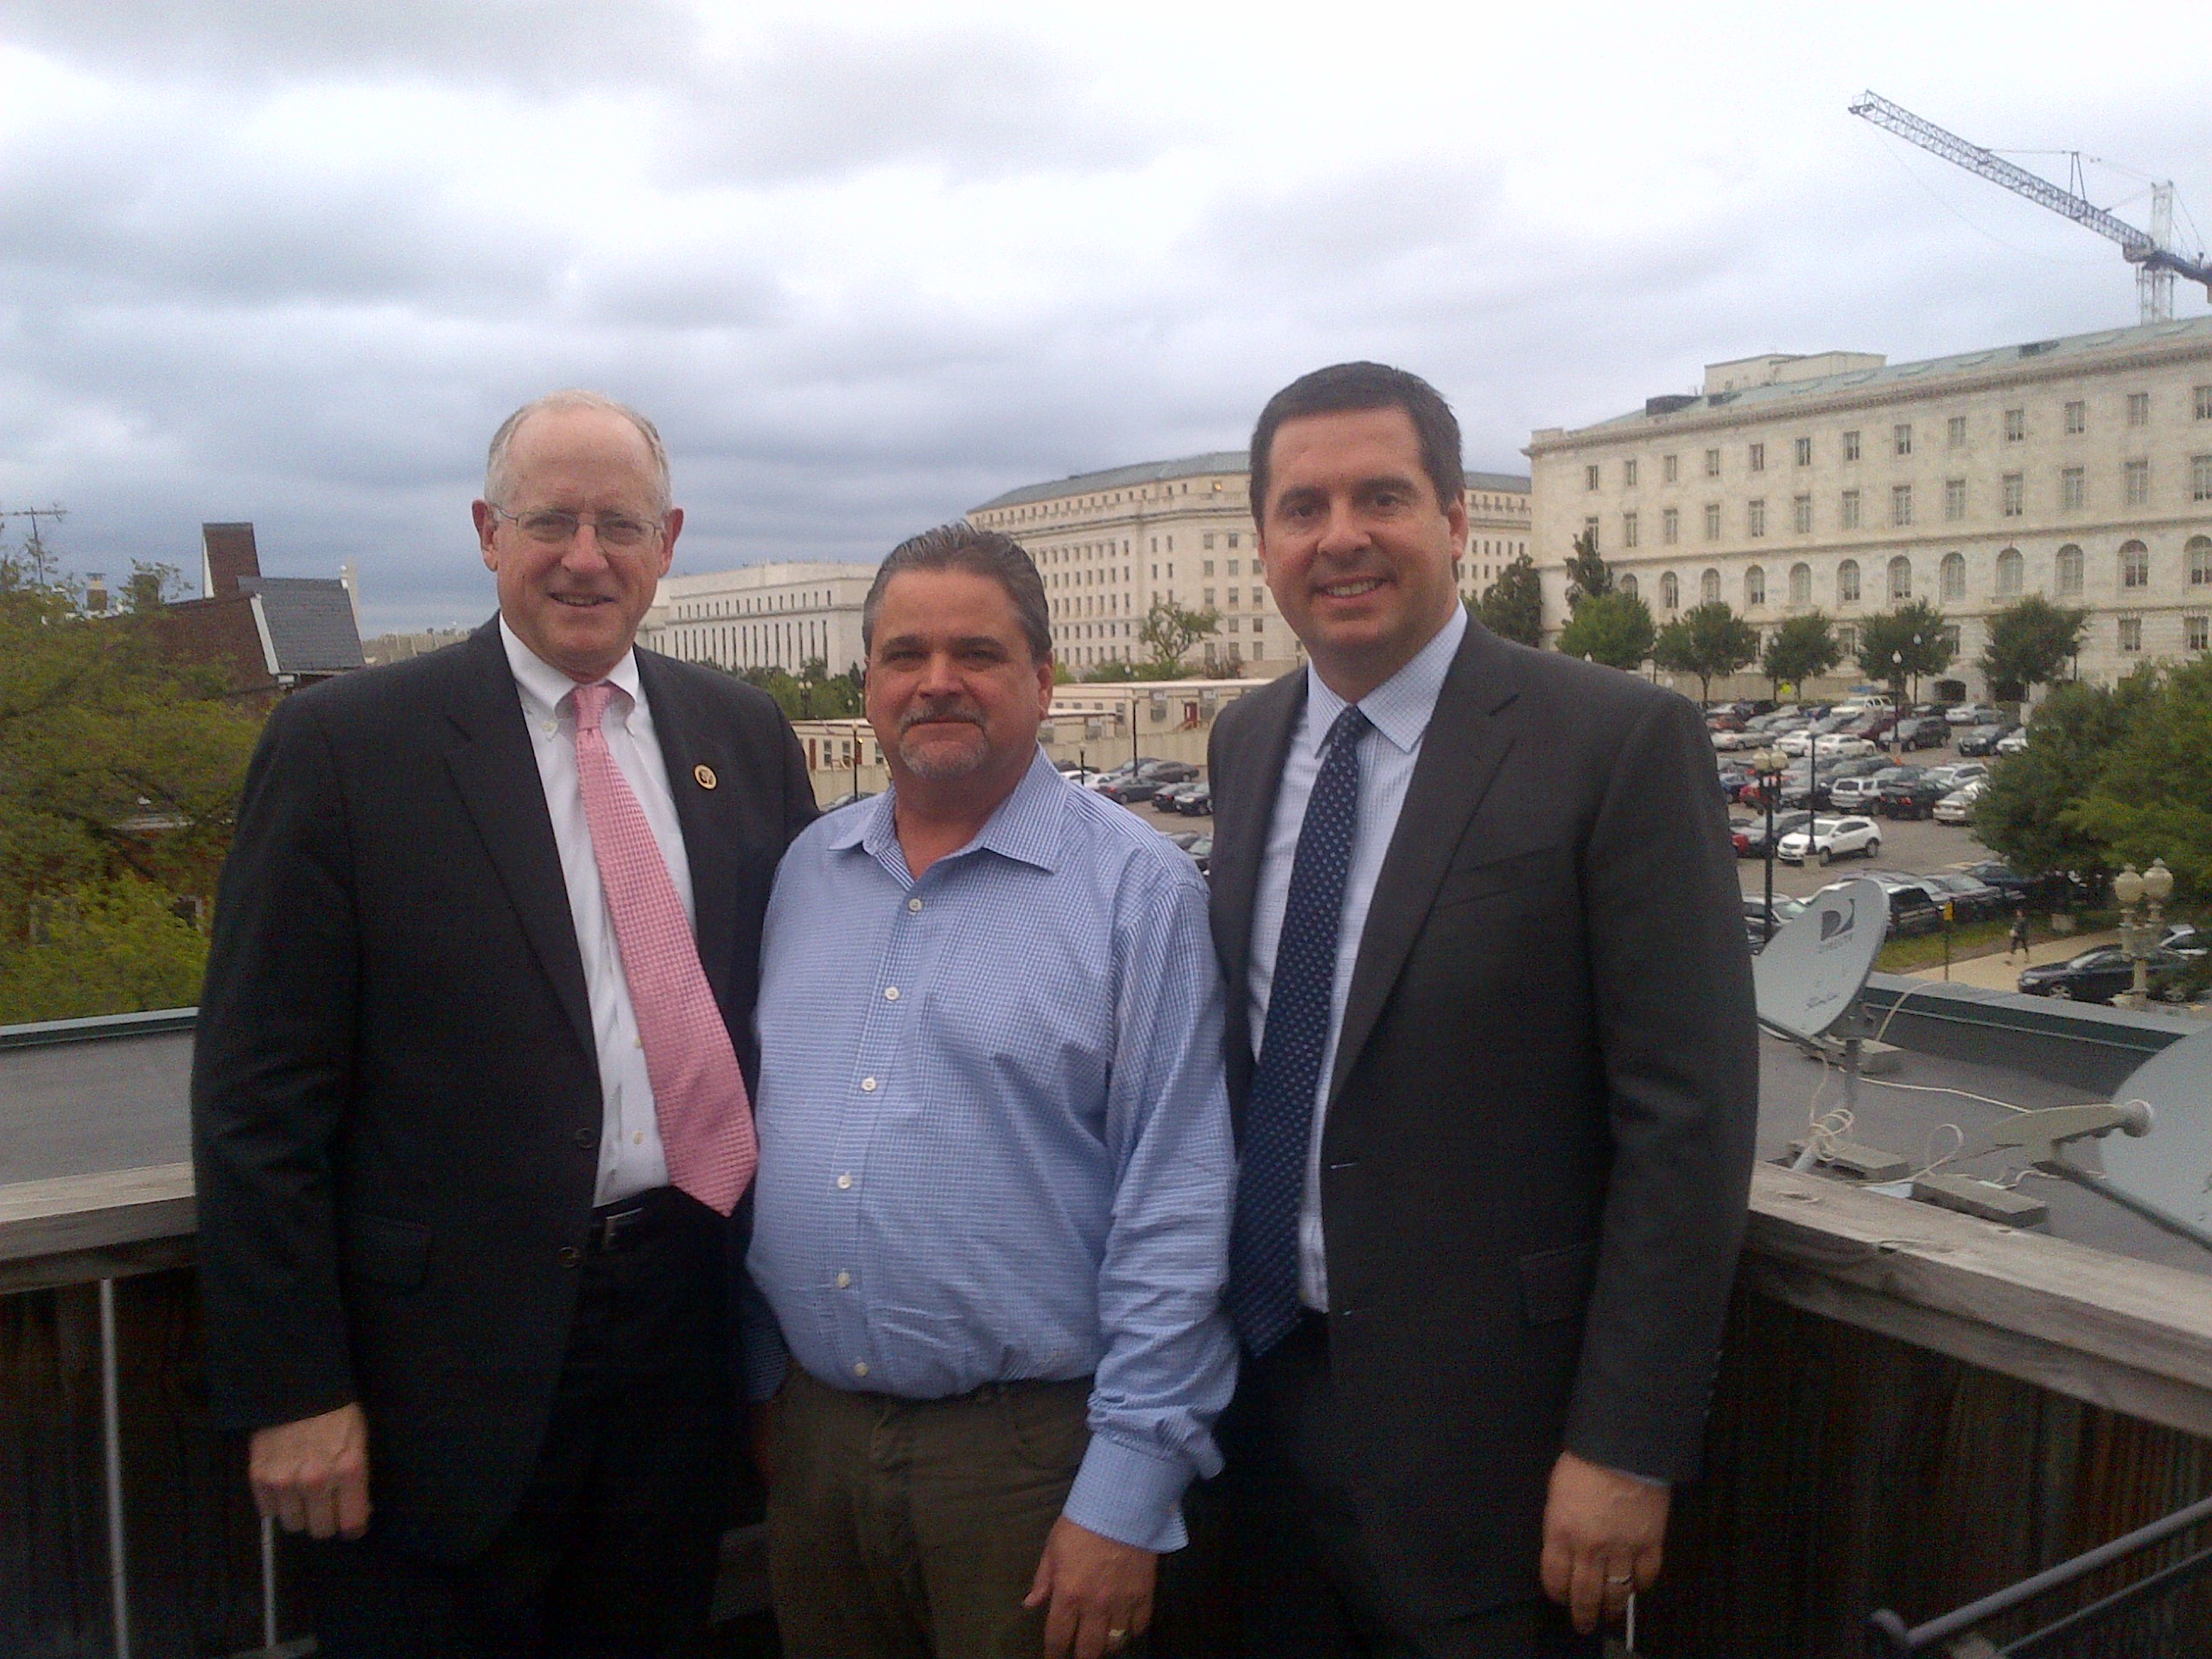 Former Resources Chairman and Gavel Resources Partner Richard Pombo hosts Chairman Conaway and Chairman Nunes on the Gavel deck.